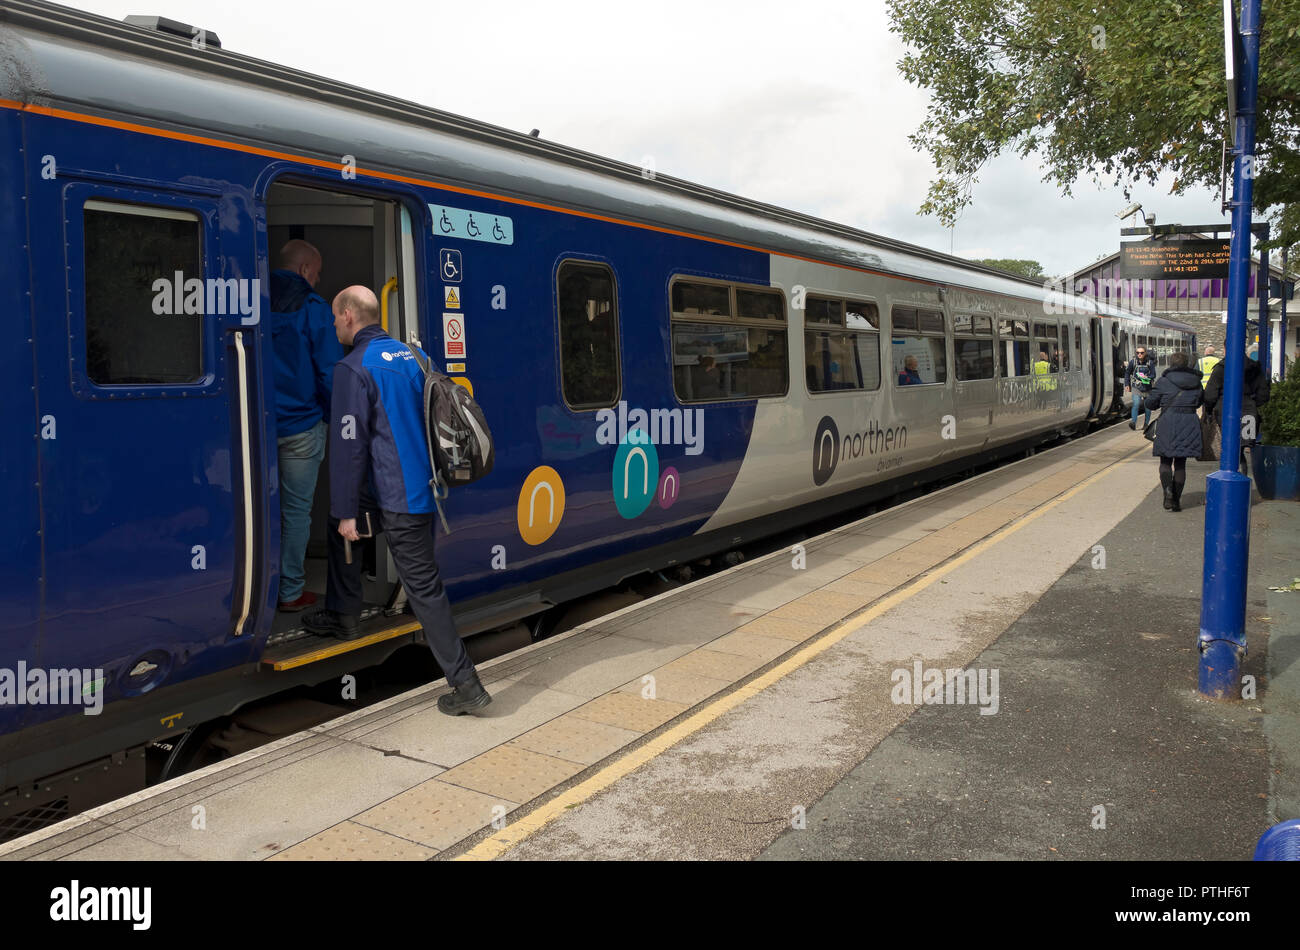 Northern rail train carriage and passengers people at the platform Windermere Railway Station Cumbria England UK United Kingdom GB Great Britain Stock Photo